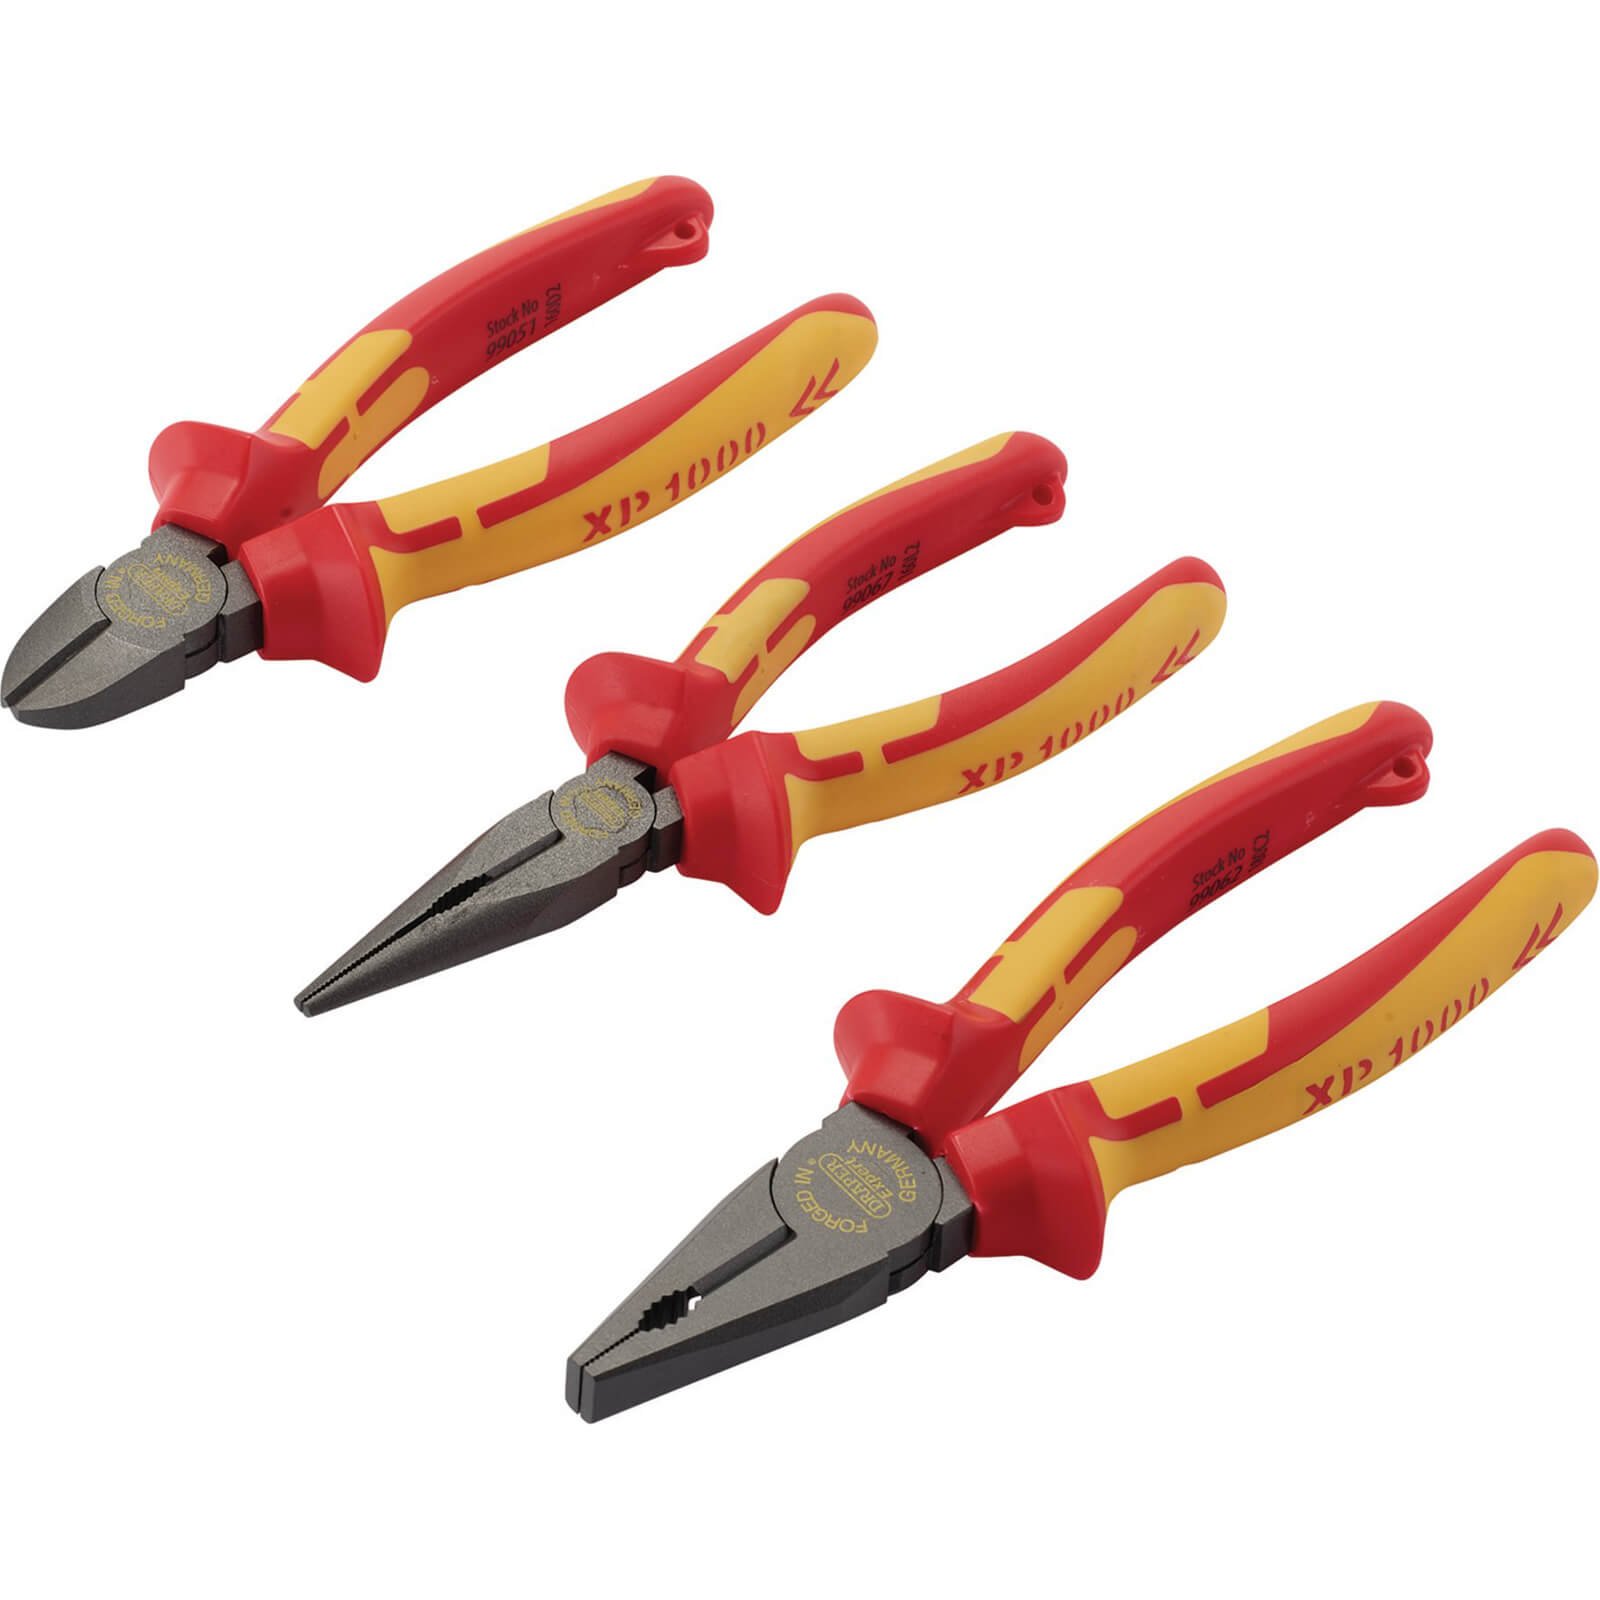 Image of Draper 3 Piece XP1000 VDE Insulated Tethered Pliers Set